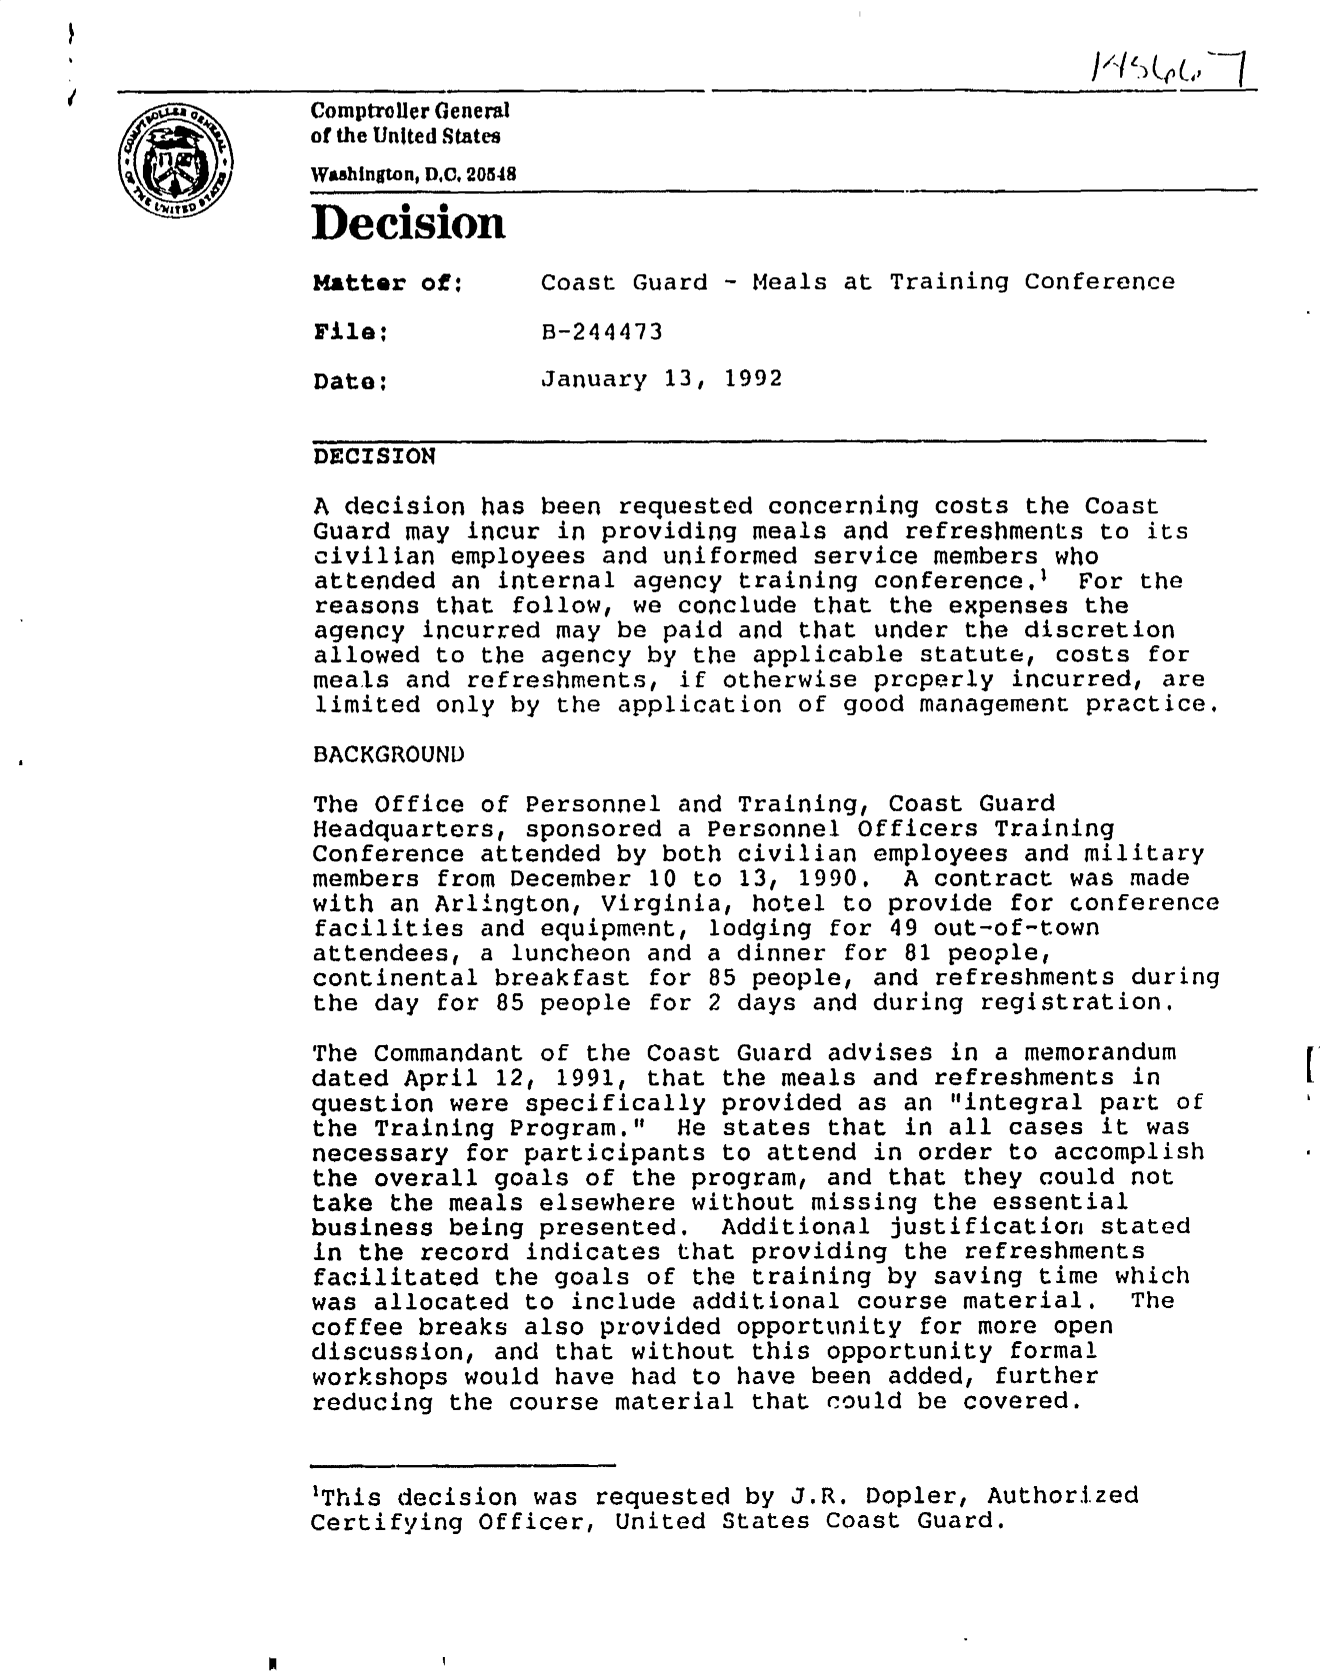 handle is hein.gao/gaobadnzp0001 and id is 1 raw text is: 


Comptroller General
of the United States
Wahington,DXC 20548

Decision

Matter of:      Coast Guard - Meals at Training Conference

File:           B-244473

Date:           January 13, 1992

DECISION

A decision has been requested concerning costs the Coast
Guard may incur in providing meals and refreshments to its
civilian employees and uniformed service members who
attended an internal agency training conference.' For the
reasons that follow, we conclude that the expenses the
agency incurred may be paid and that under the discretion
allowed to the agency by the applicable statute, costs for
meals and refreshments, if otherwise prcperly incurred, are
limited only by the application of good management practice.

BACKGROUND

The Office of Personnel and Training, Coast Guard
Headquarters, sponsored a Personnel Officers Training
Conference attended by both civilian employees and military
members from December 10 to 13, 1990. A contract was made
with an Arlington, Virginia, hotel to provide for conference
facilities and equipment, lodging for 49 out-of-town
attendees, a luncheon and a dinner for 81 people,
continental breakfast for 85 people, and refreshments during
the day for 85 people for 2 days and during registration.

The Commandant of the Coast Guard advises in a memorandum
dated April 12, 1991, that the meals and refreshments in
question were specifically provided as an integral part of
the Training Program.   He states that in all cases it was
necessary for participants to attend in order to accomplish
the overall goals of the program, and that they could not
take the meals elsewhere without missing the essential
business being presented. Additional justification stated
in the record indicates that providing the refreshments
facilitated the goals of the training by saving time which
was allocated to include additional course material.     The
coffee breaks also provided opportunity for more open
discussion, and that without this opportunity formal
workshops would have had to have been added, further
reducing the course material that could be covered.


'This decision was requested by J.R. Dopler, Authorized
Certifying Officer, United States Coast Guard.


